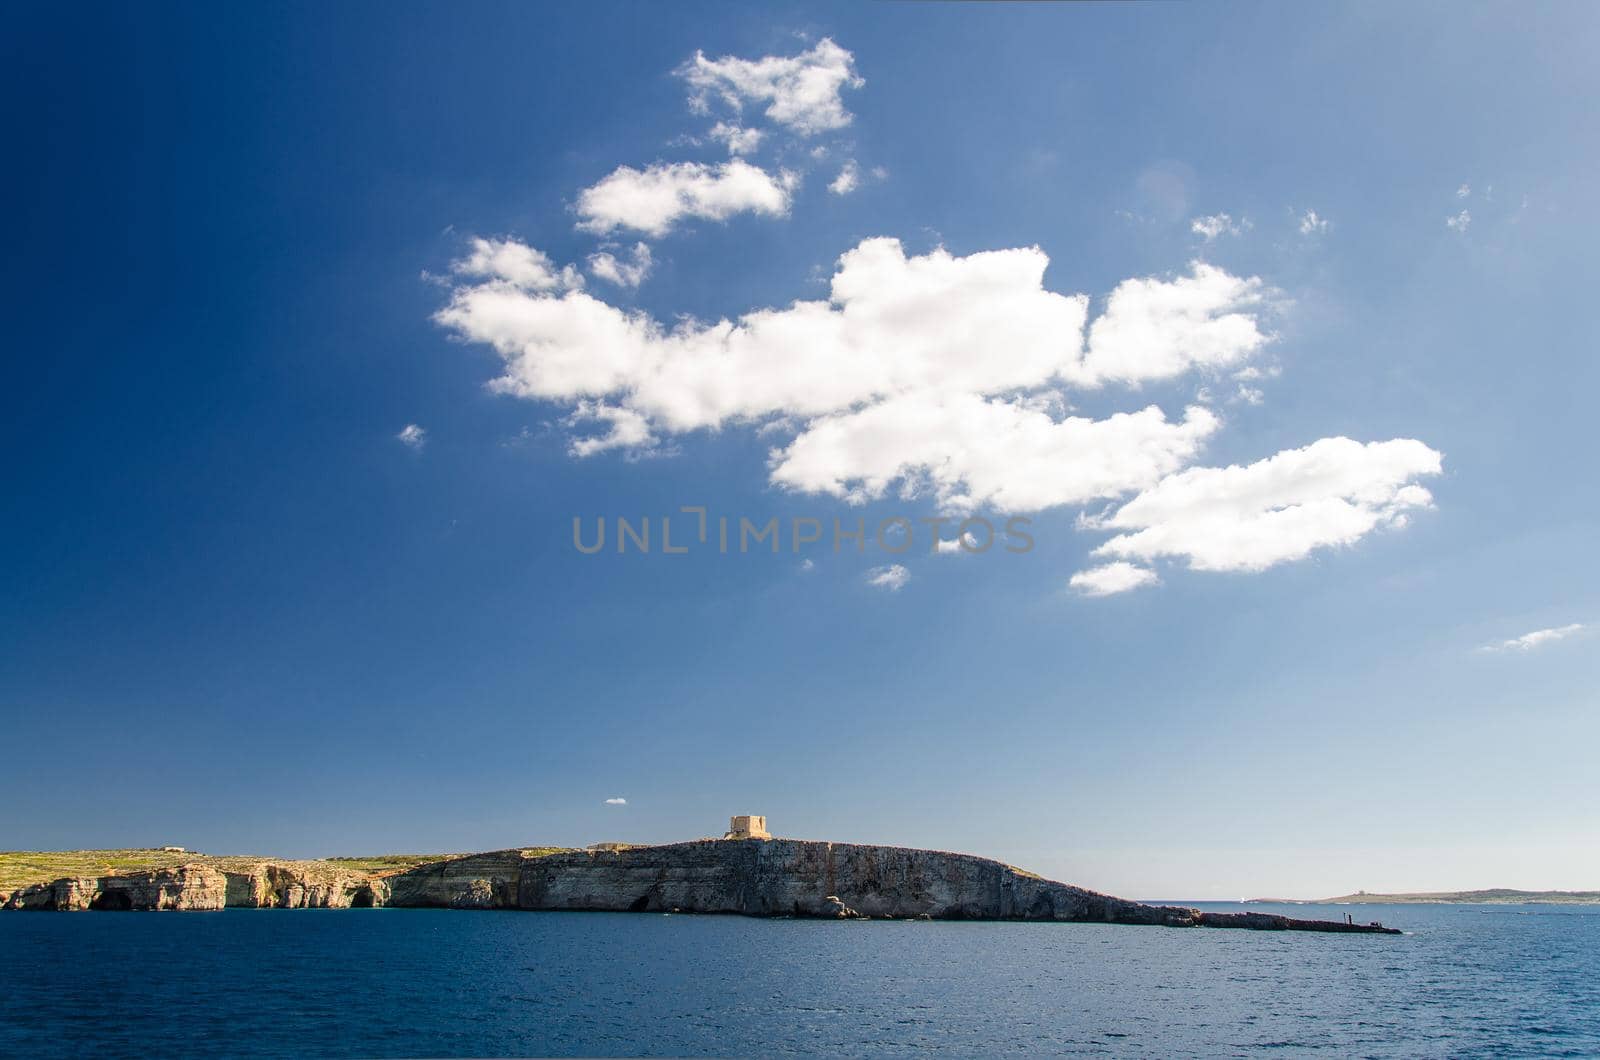 Blue sky and white clouds above Saint Mary's Tower bastioned watchtower on the island of Comino or Kemmuna of the Maltese Archipelago in the Mediterranean Sea, Malta